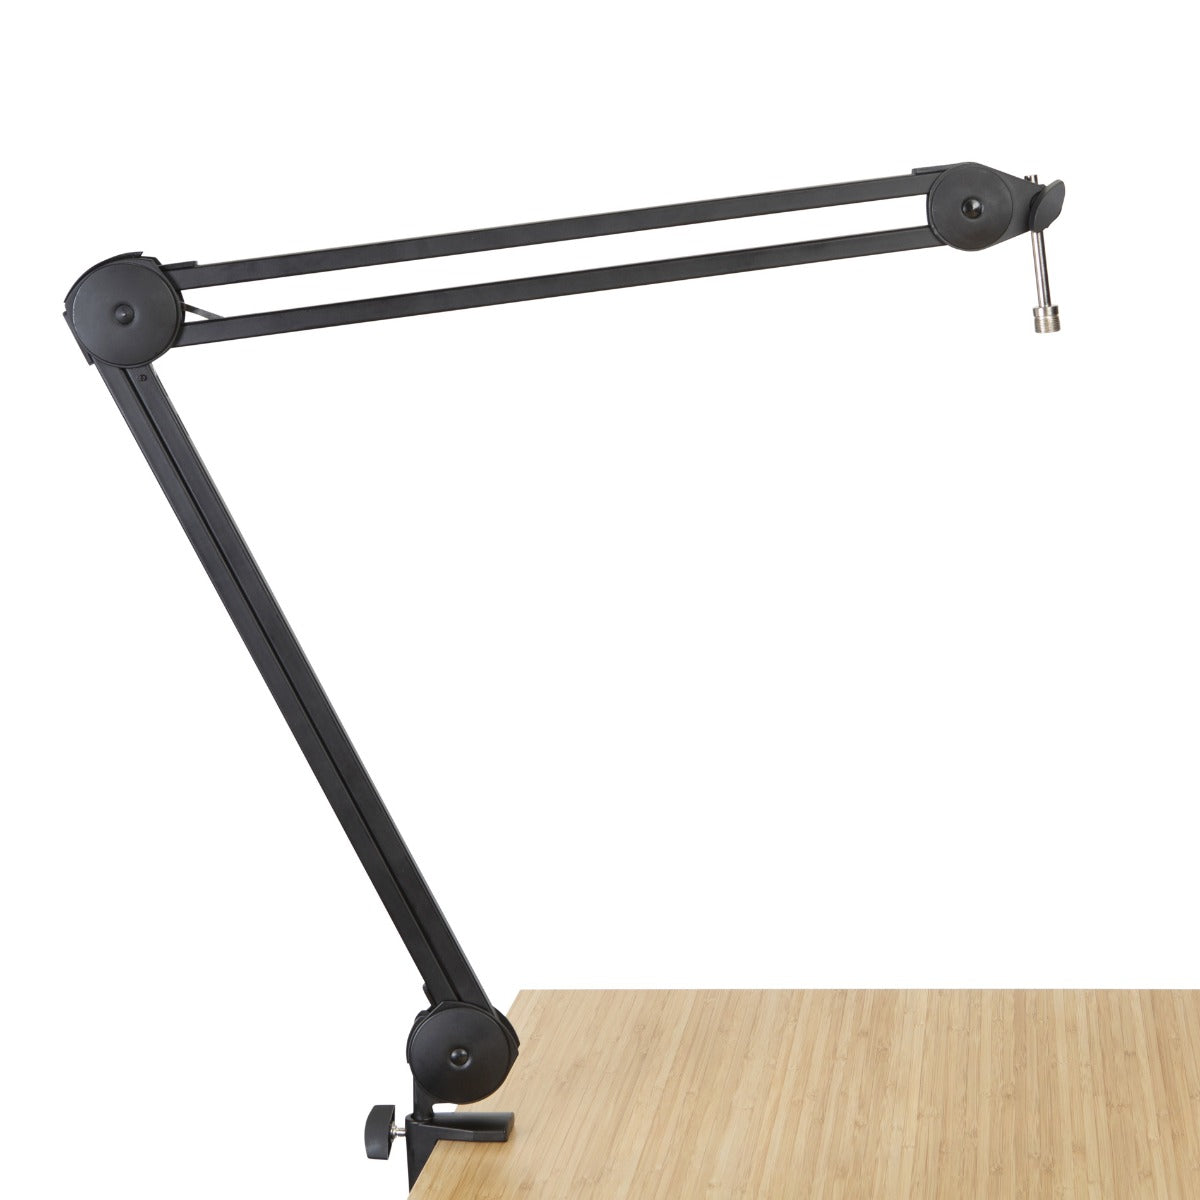 Image of the Gator Frameworks Desktop Mic Boom Stand clamped to a desk without the mic attached